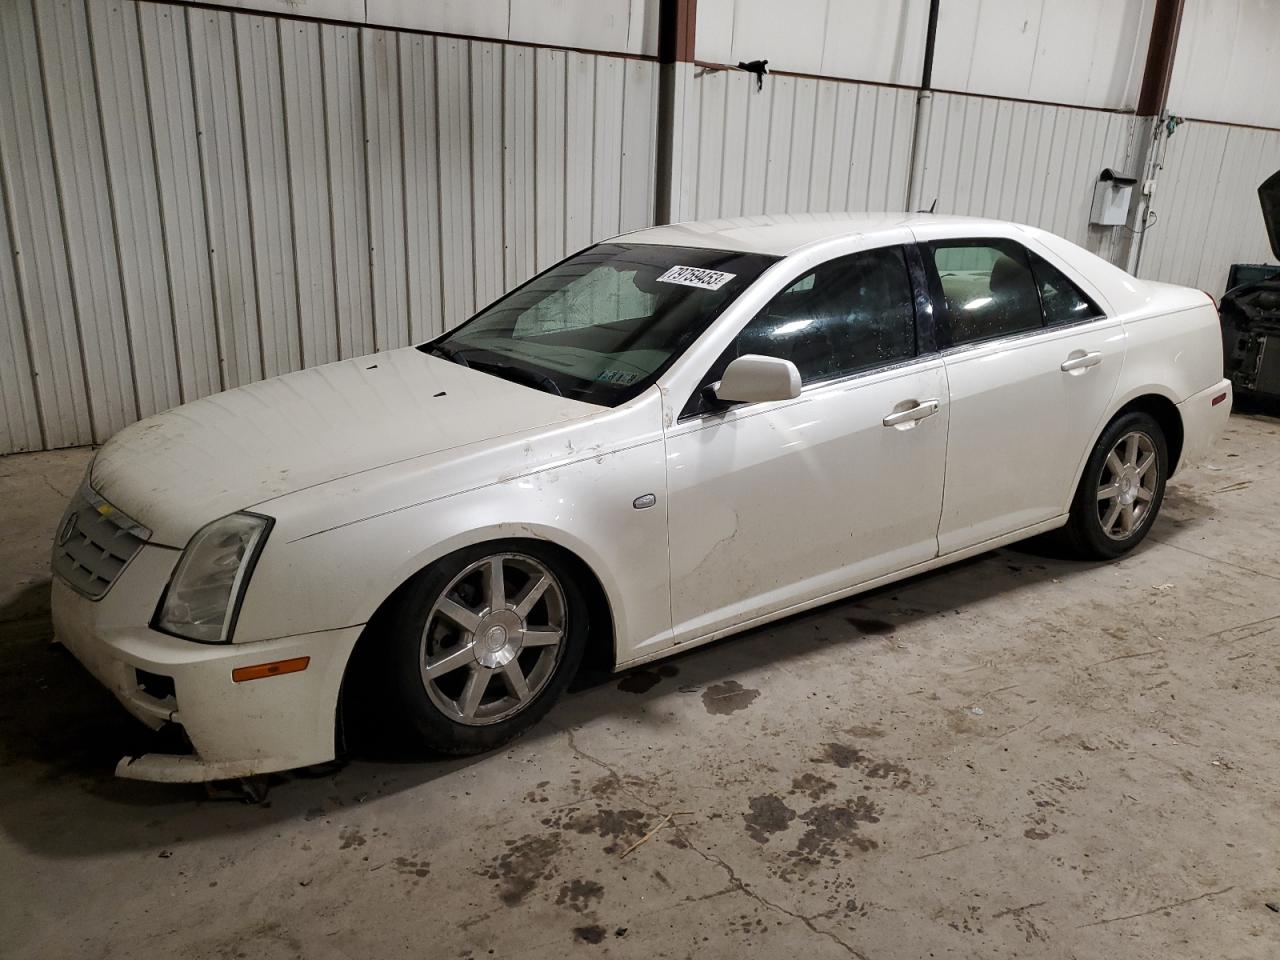 vin: 1G6DW677350179070 1G6DW677350179070 2005 cadillac sts 3600 for Sale in 18073 2303, Pa - Philadelphia, Pennsburg, USA